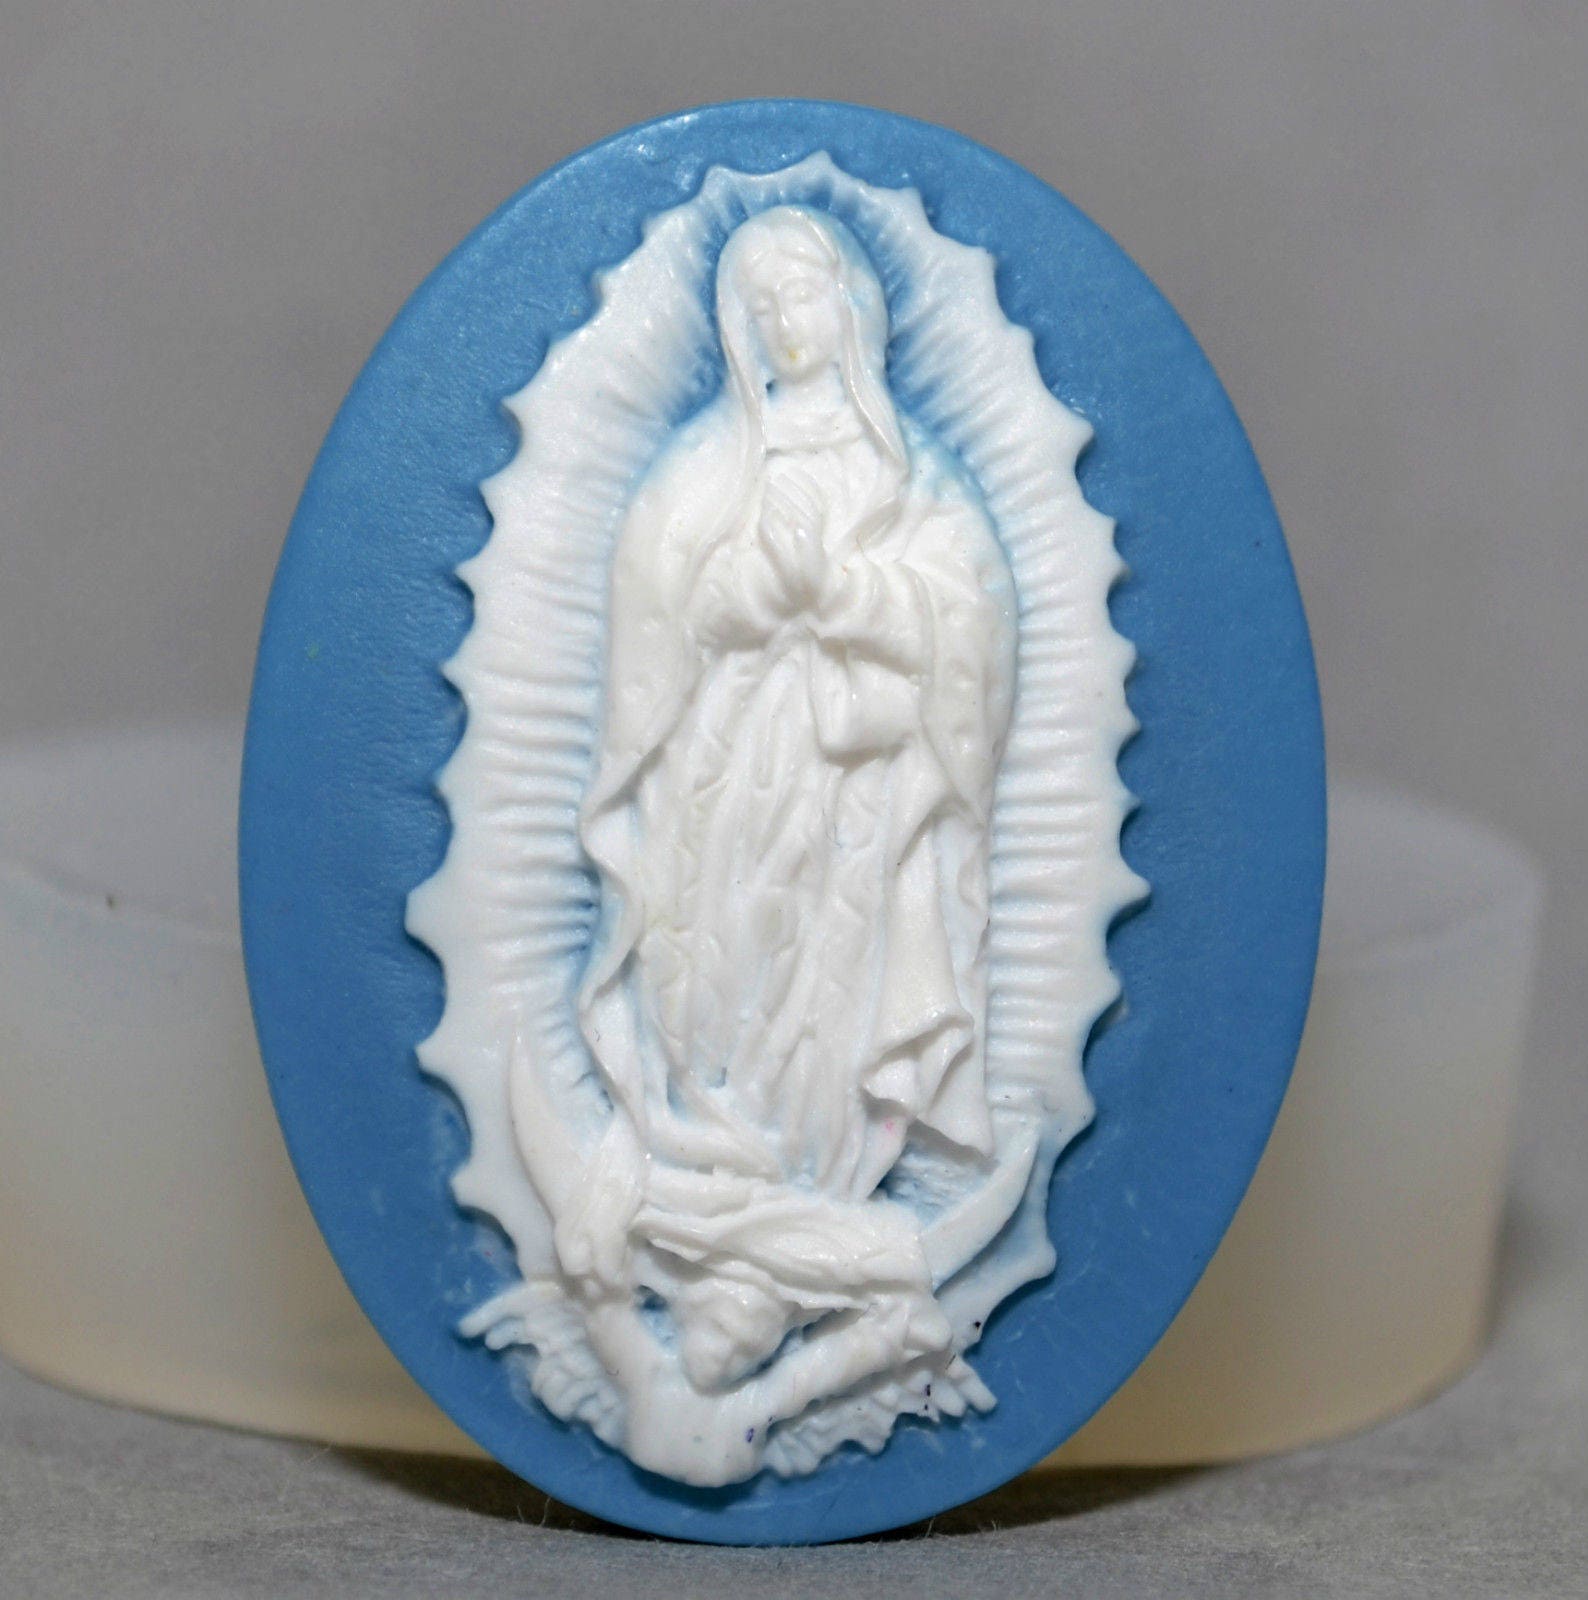 VIRGIN MOTHER MARY CAMEO  Silicone Mould Cupcake polymer clay resin fimo mold